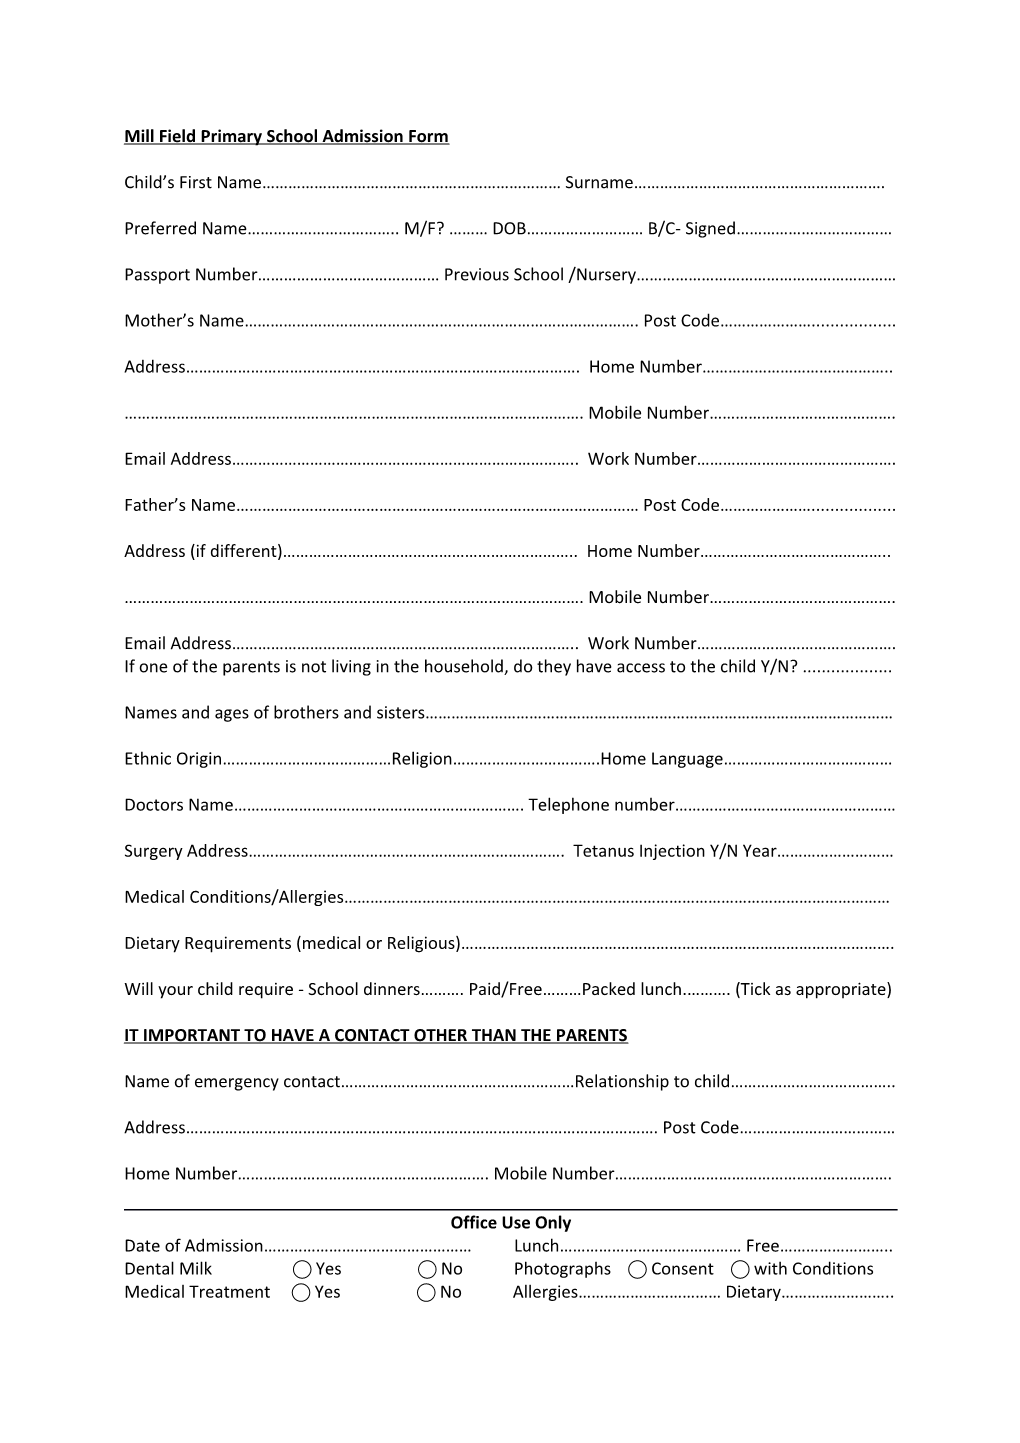 Mill Field Primary School Admission Form